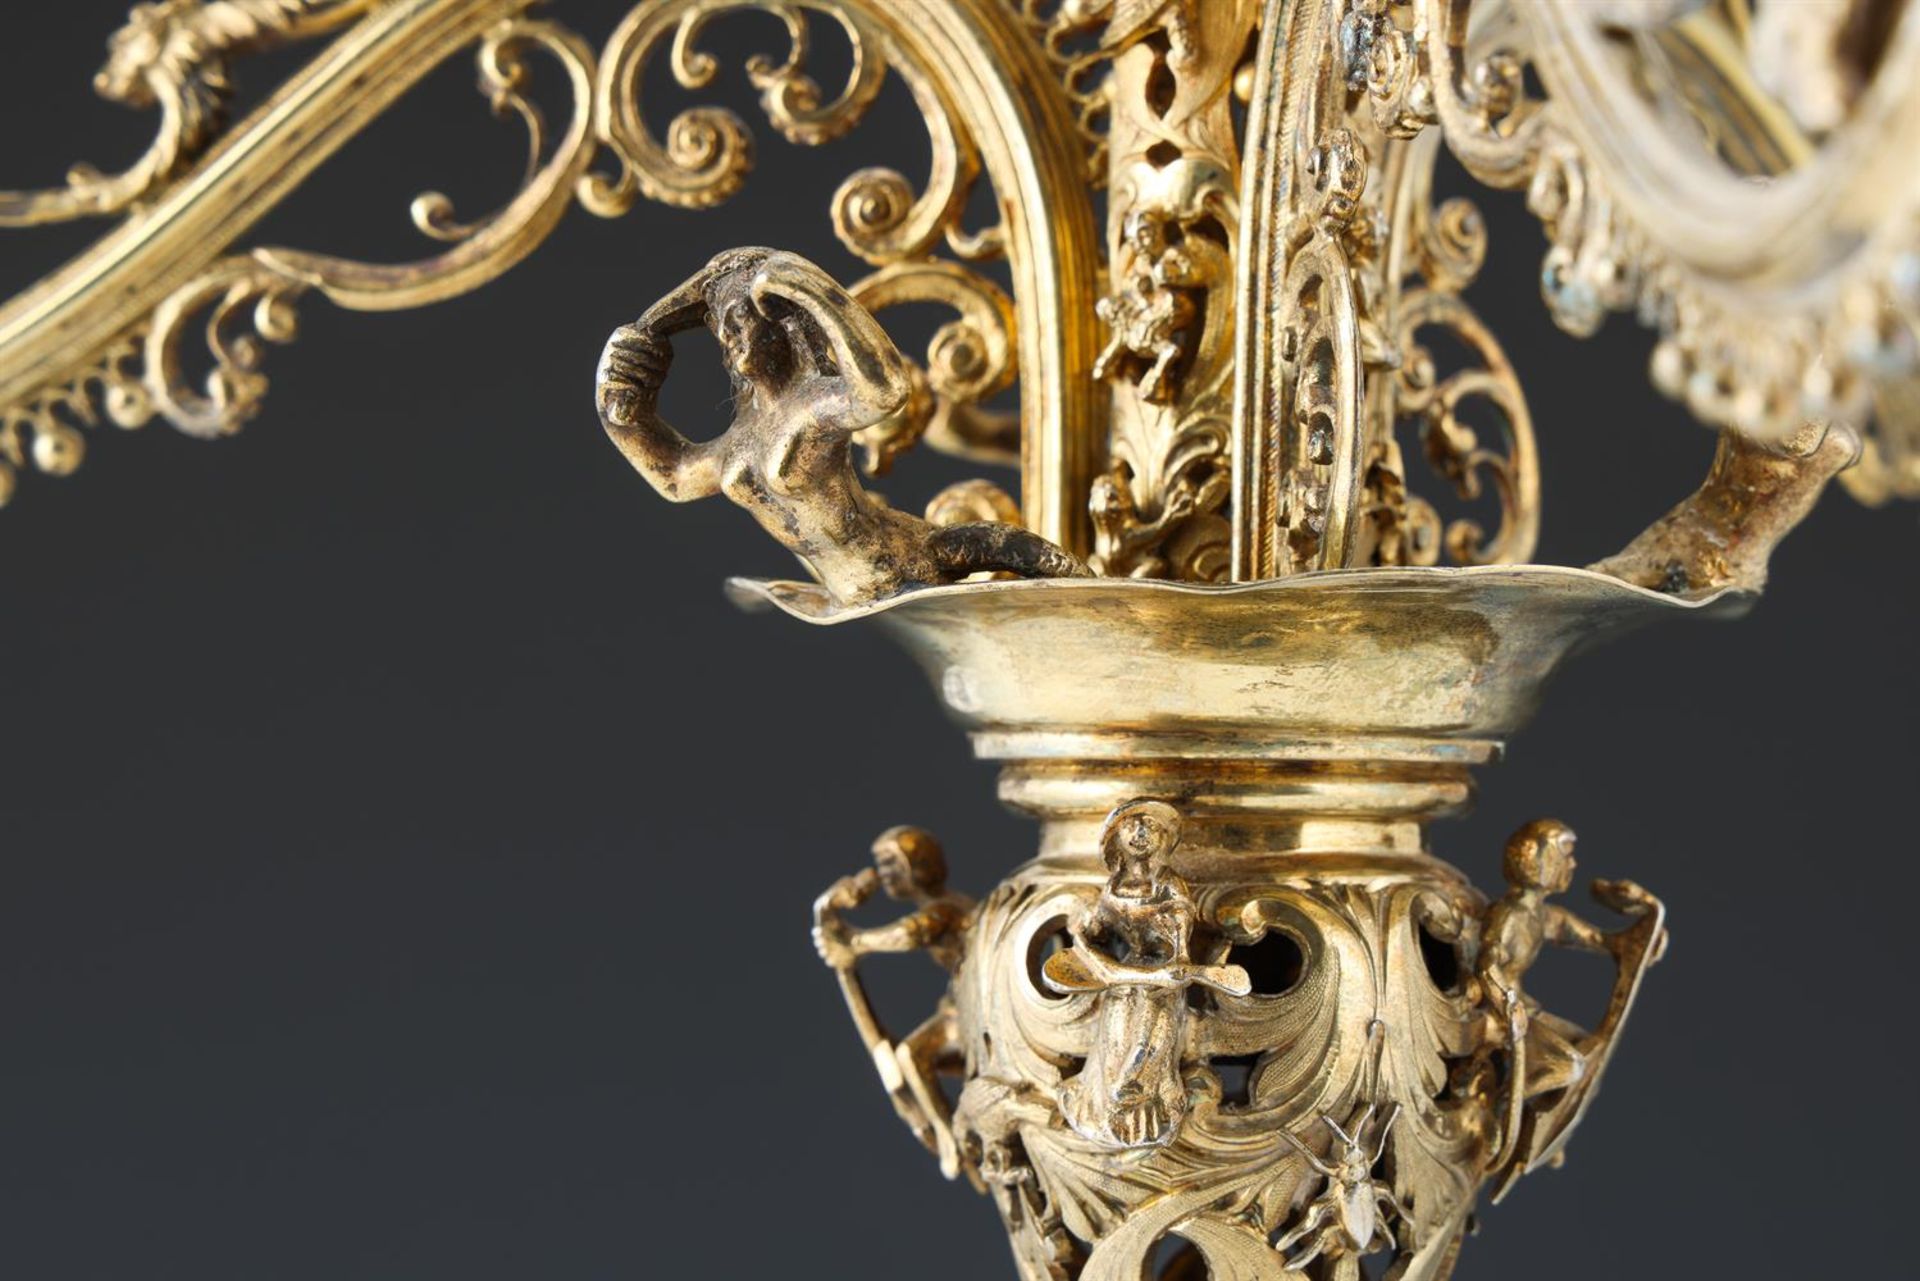 A PAIR OF MATCHED VICTORIAN SCOTTISH SILVER GILT FOUR LIGHT CANDELABRA - Image 4 of 9